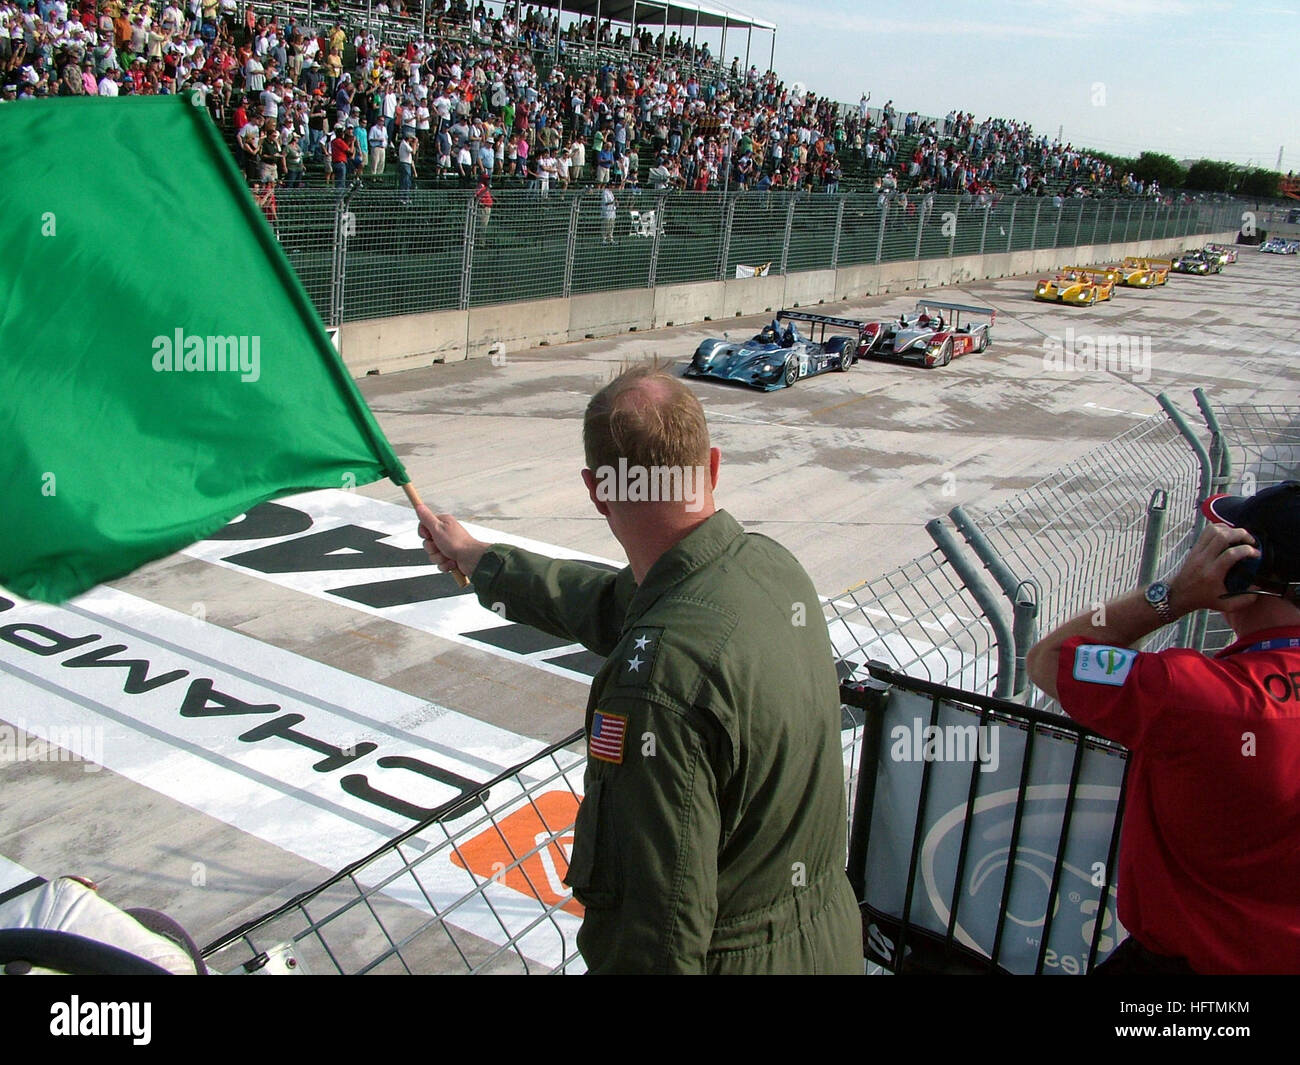 070421-N-7665S-074 HOUSTON, Texas (April 21, 2007) Ð Commander, Naval Strike and Air Warfare Center, Rear Adm. Mark T. Emerson, waves the green flag to signal the start of the American Le Mans Series sport car race at Houston. The American Le Mans Series is a series of North American professional sports car races. U.S. Navy photo by Storekeeper 2nd Class Jonn Stone (RELEASED) US Navy 070421-N-7665S-074 Commander, Naval Strike and Air Warfare Center, Rear Adm. Mark T. Emerson, waves the green flag to signal the start of the American Le Mans Series sport car race at Houston Stock Photo